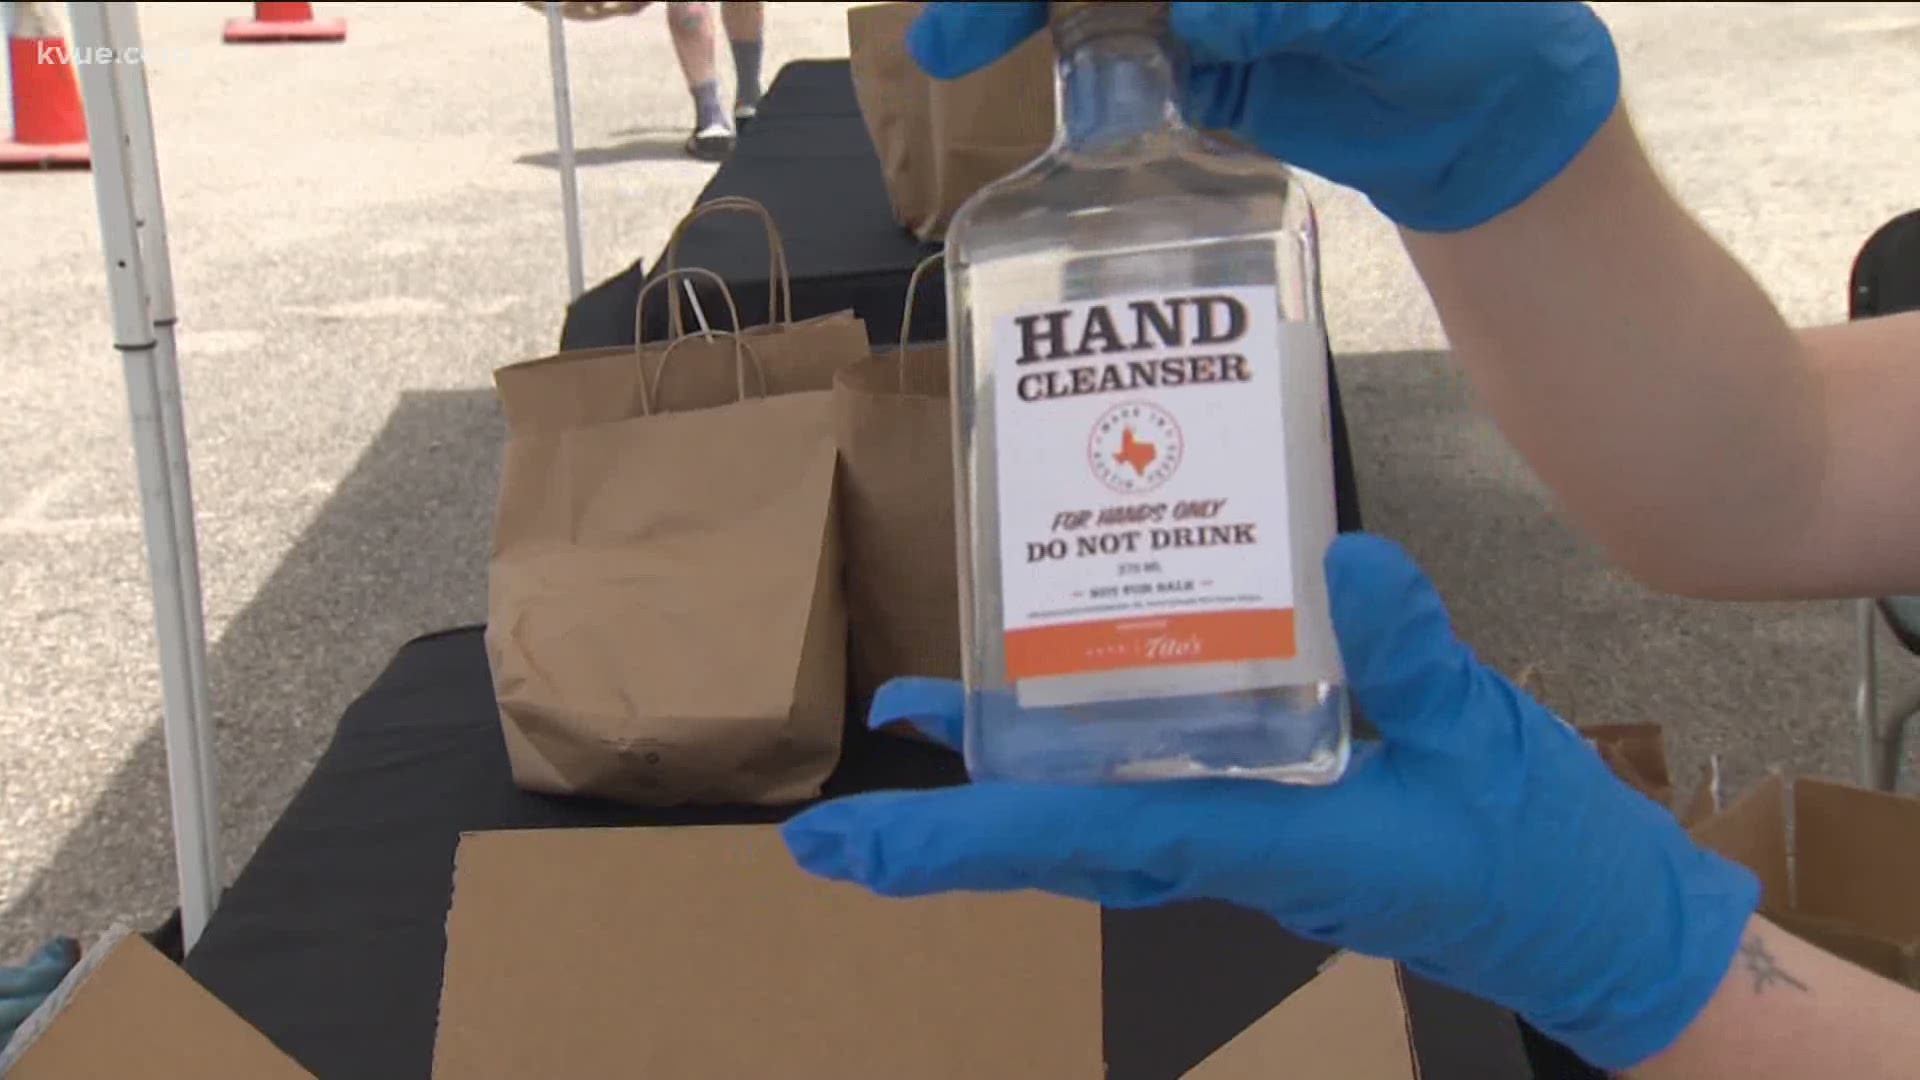 Workers with the company brought 21,000 bottles of hand sanitizer to Krieg Softball Complex in southeast Austin Thursday.